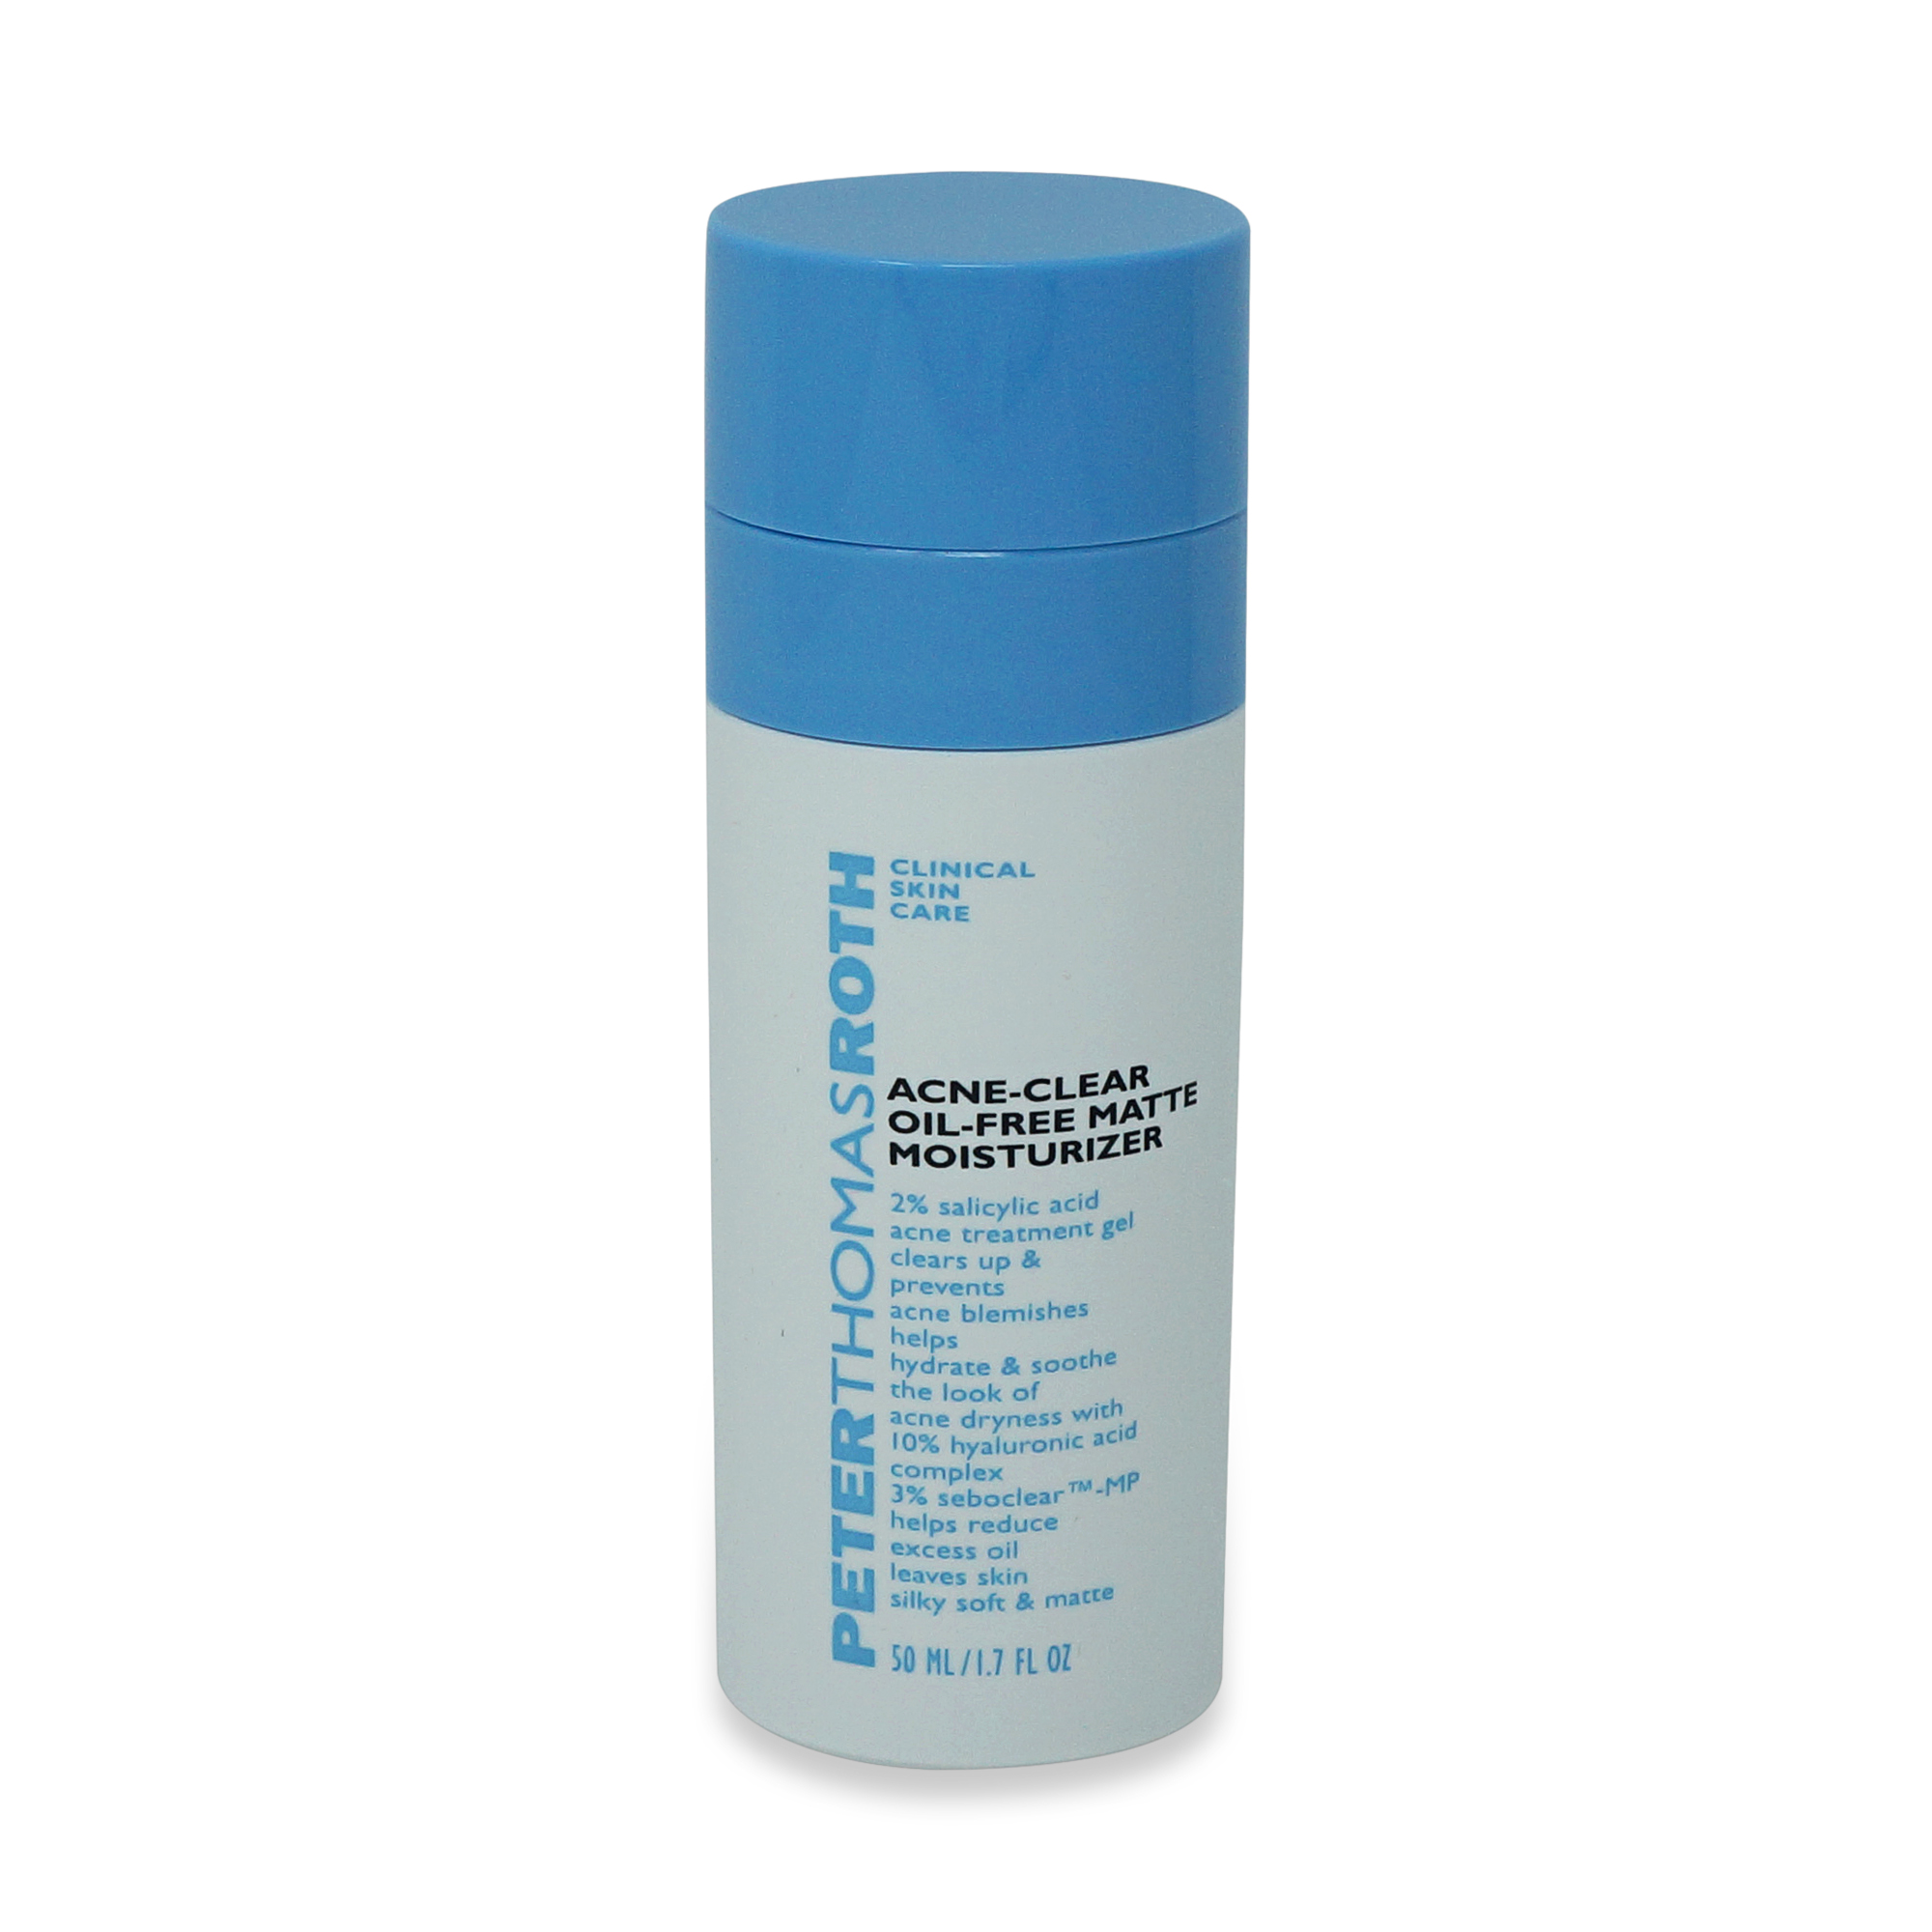 Peter Thomas Roth Acne Clear Oil Free Matte Moisturizer 1.7oz - image 1 of 3